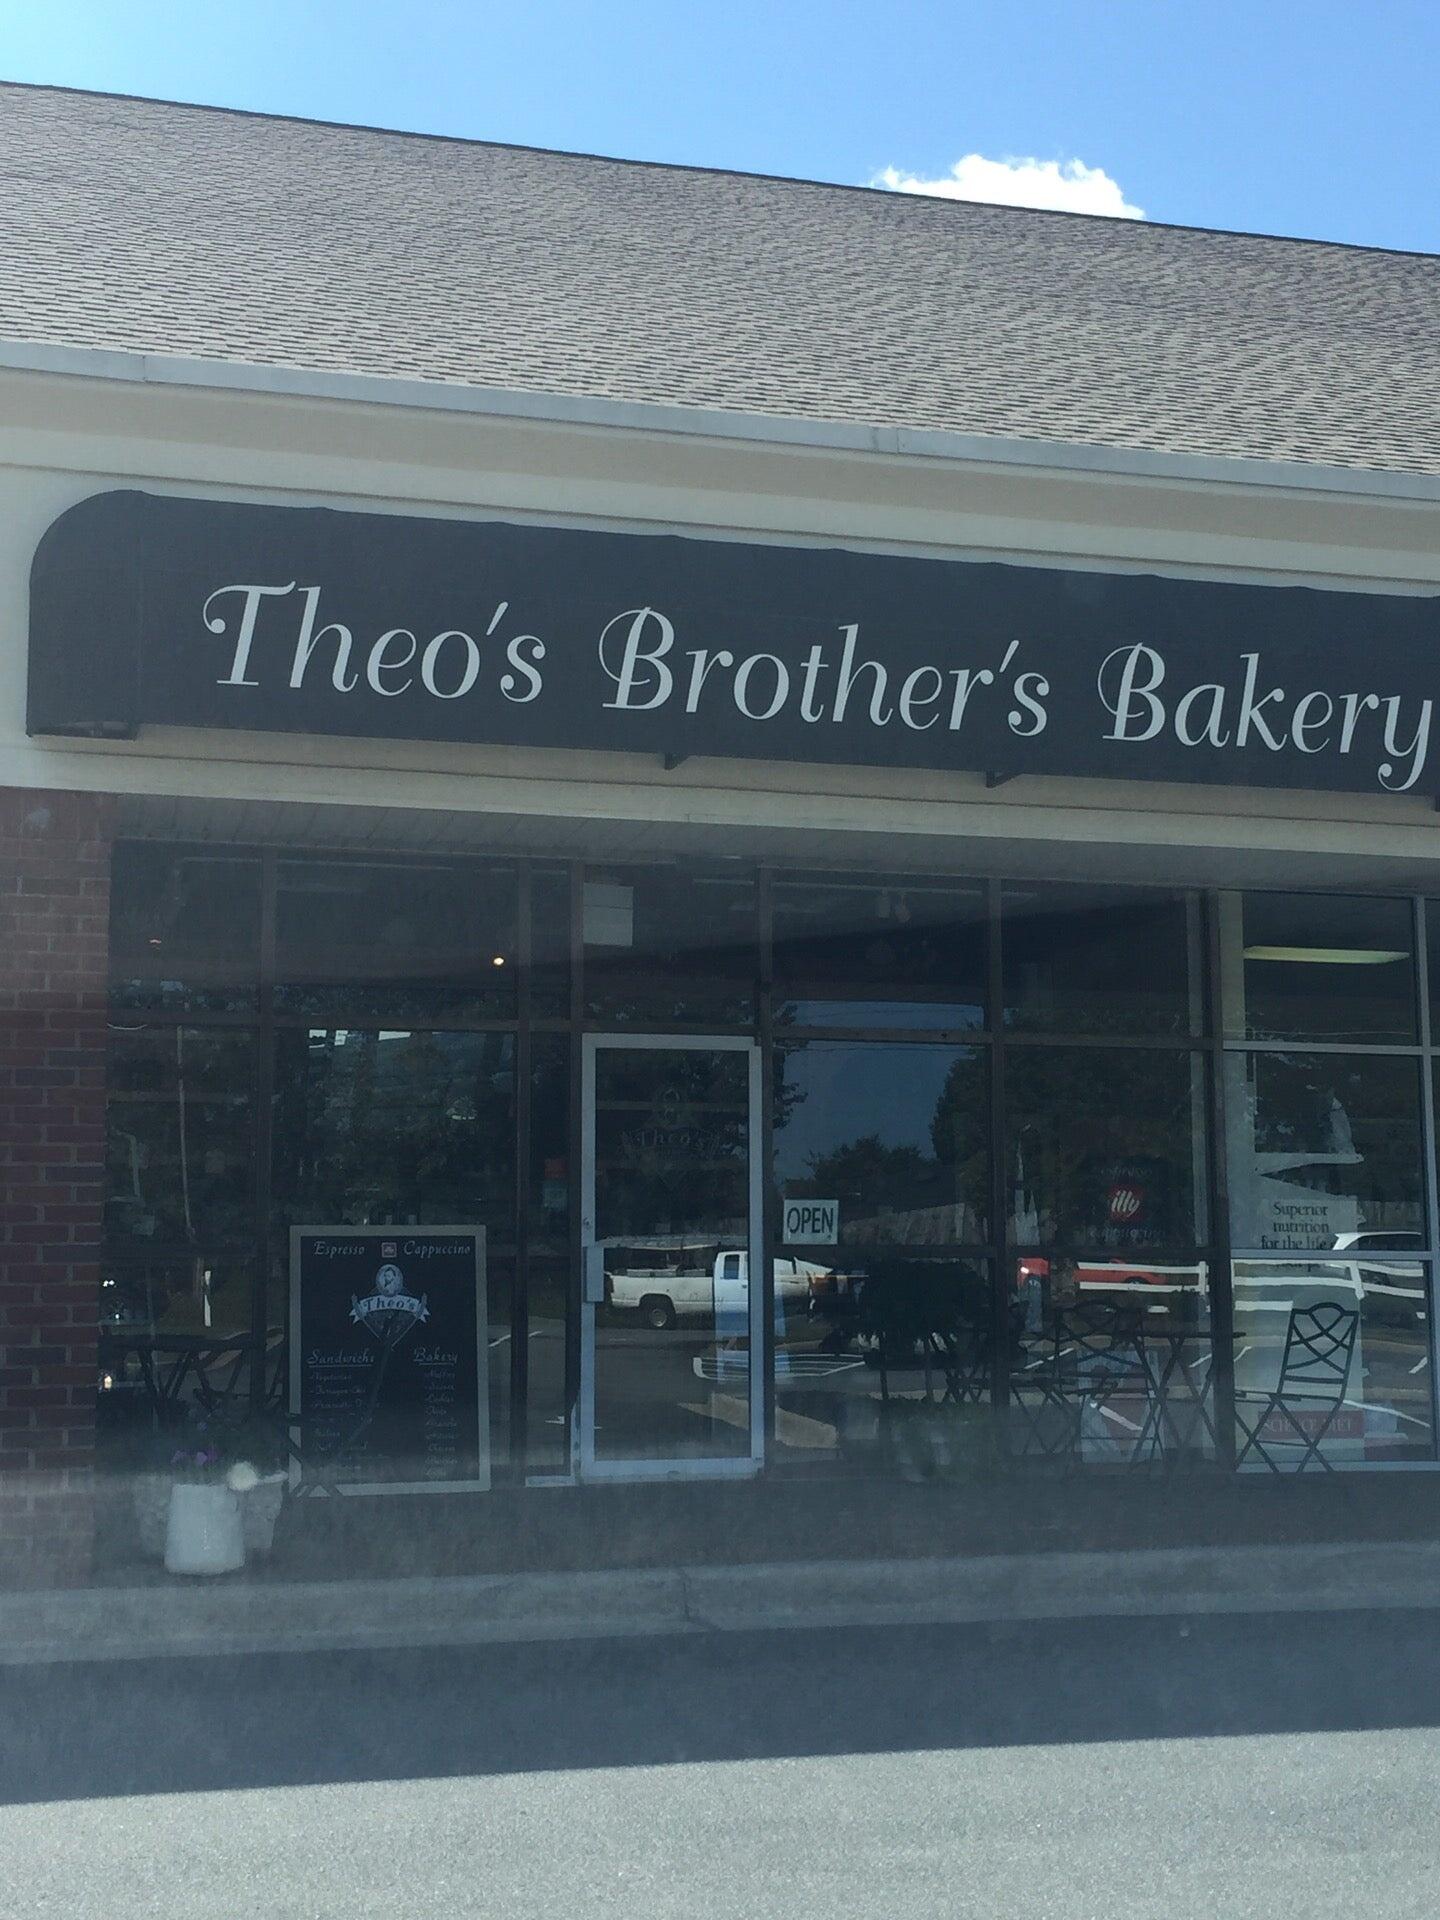 Theo's Brother's Bakery